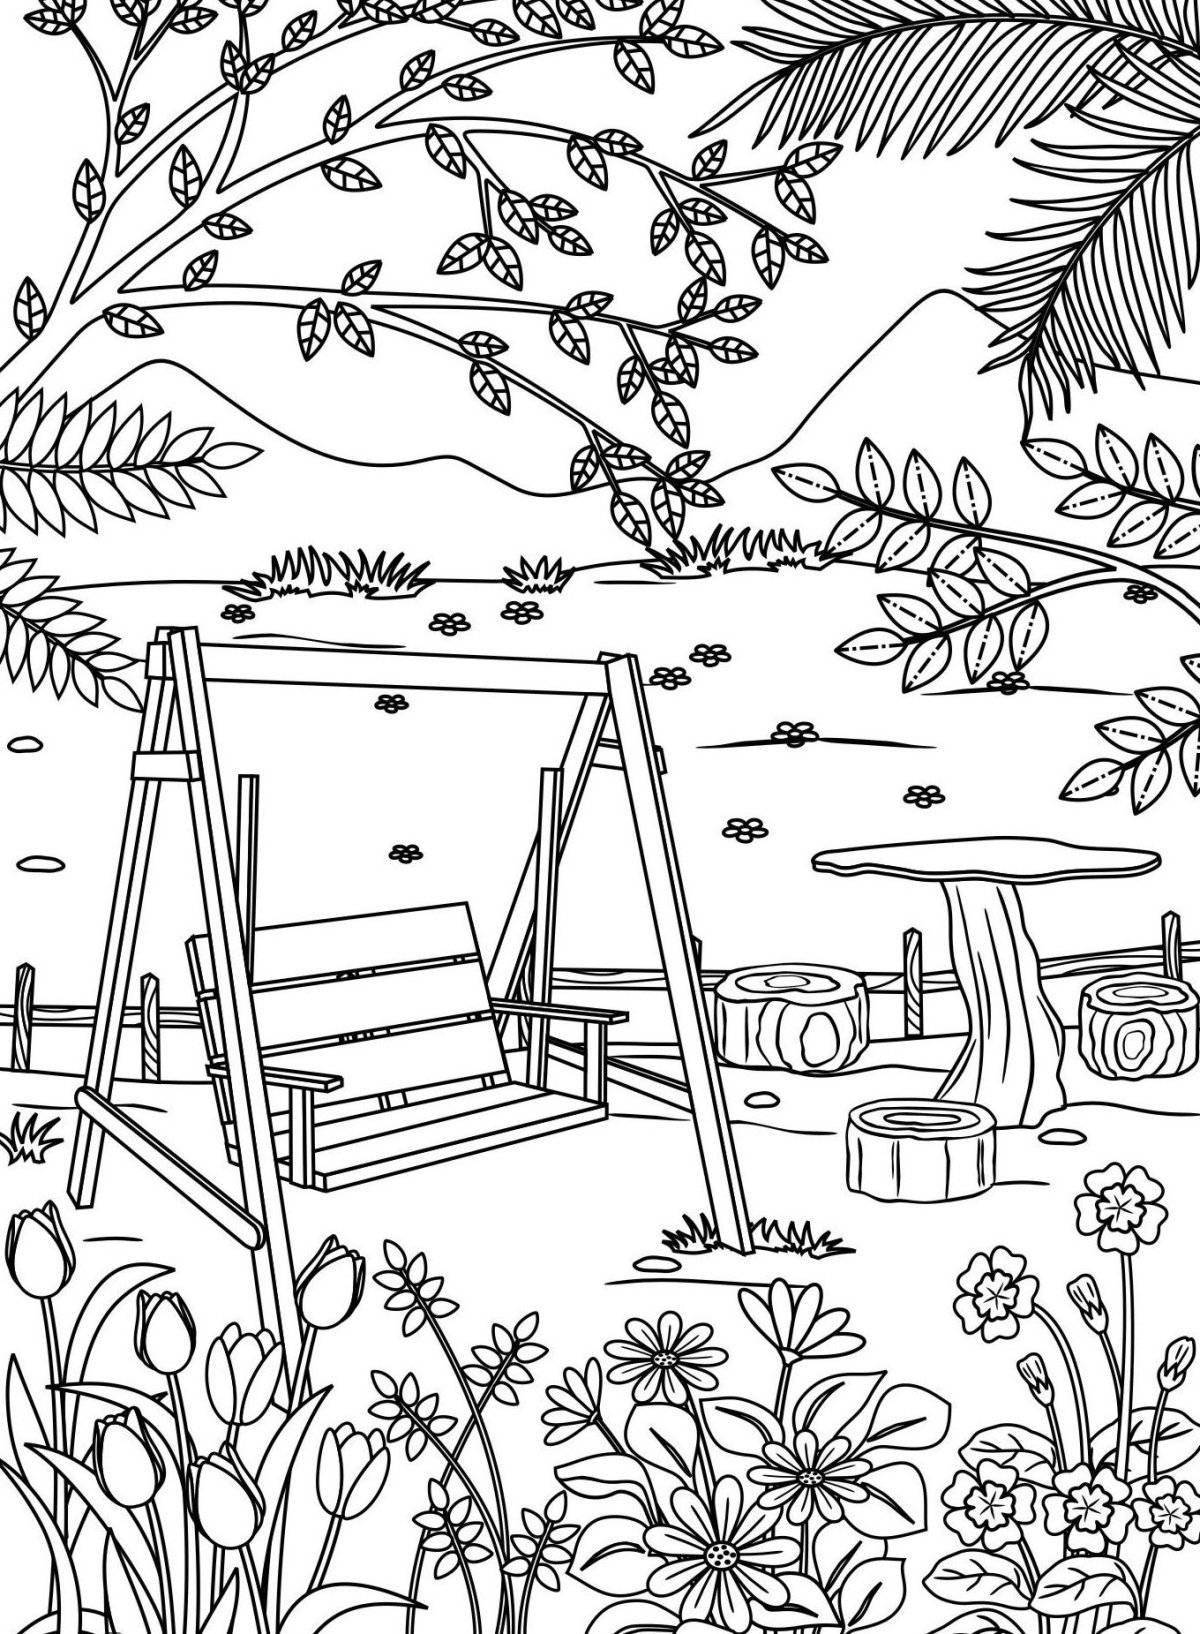 Coloring page magical park